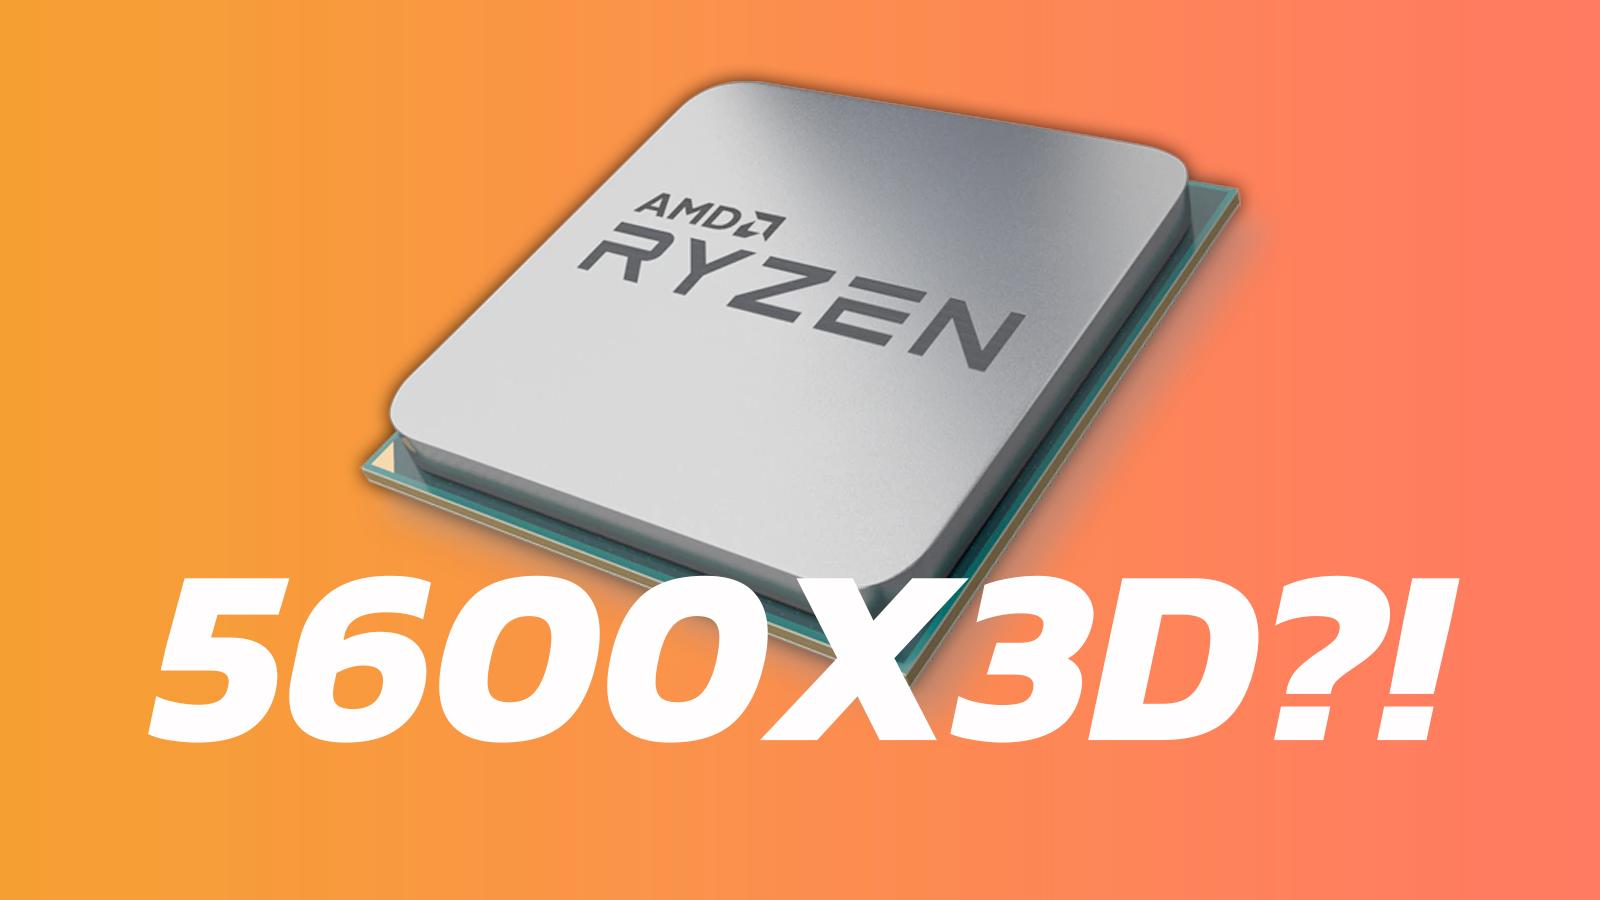 AMD CPU with 5600X3D?! in front of it